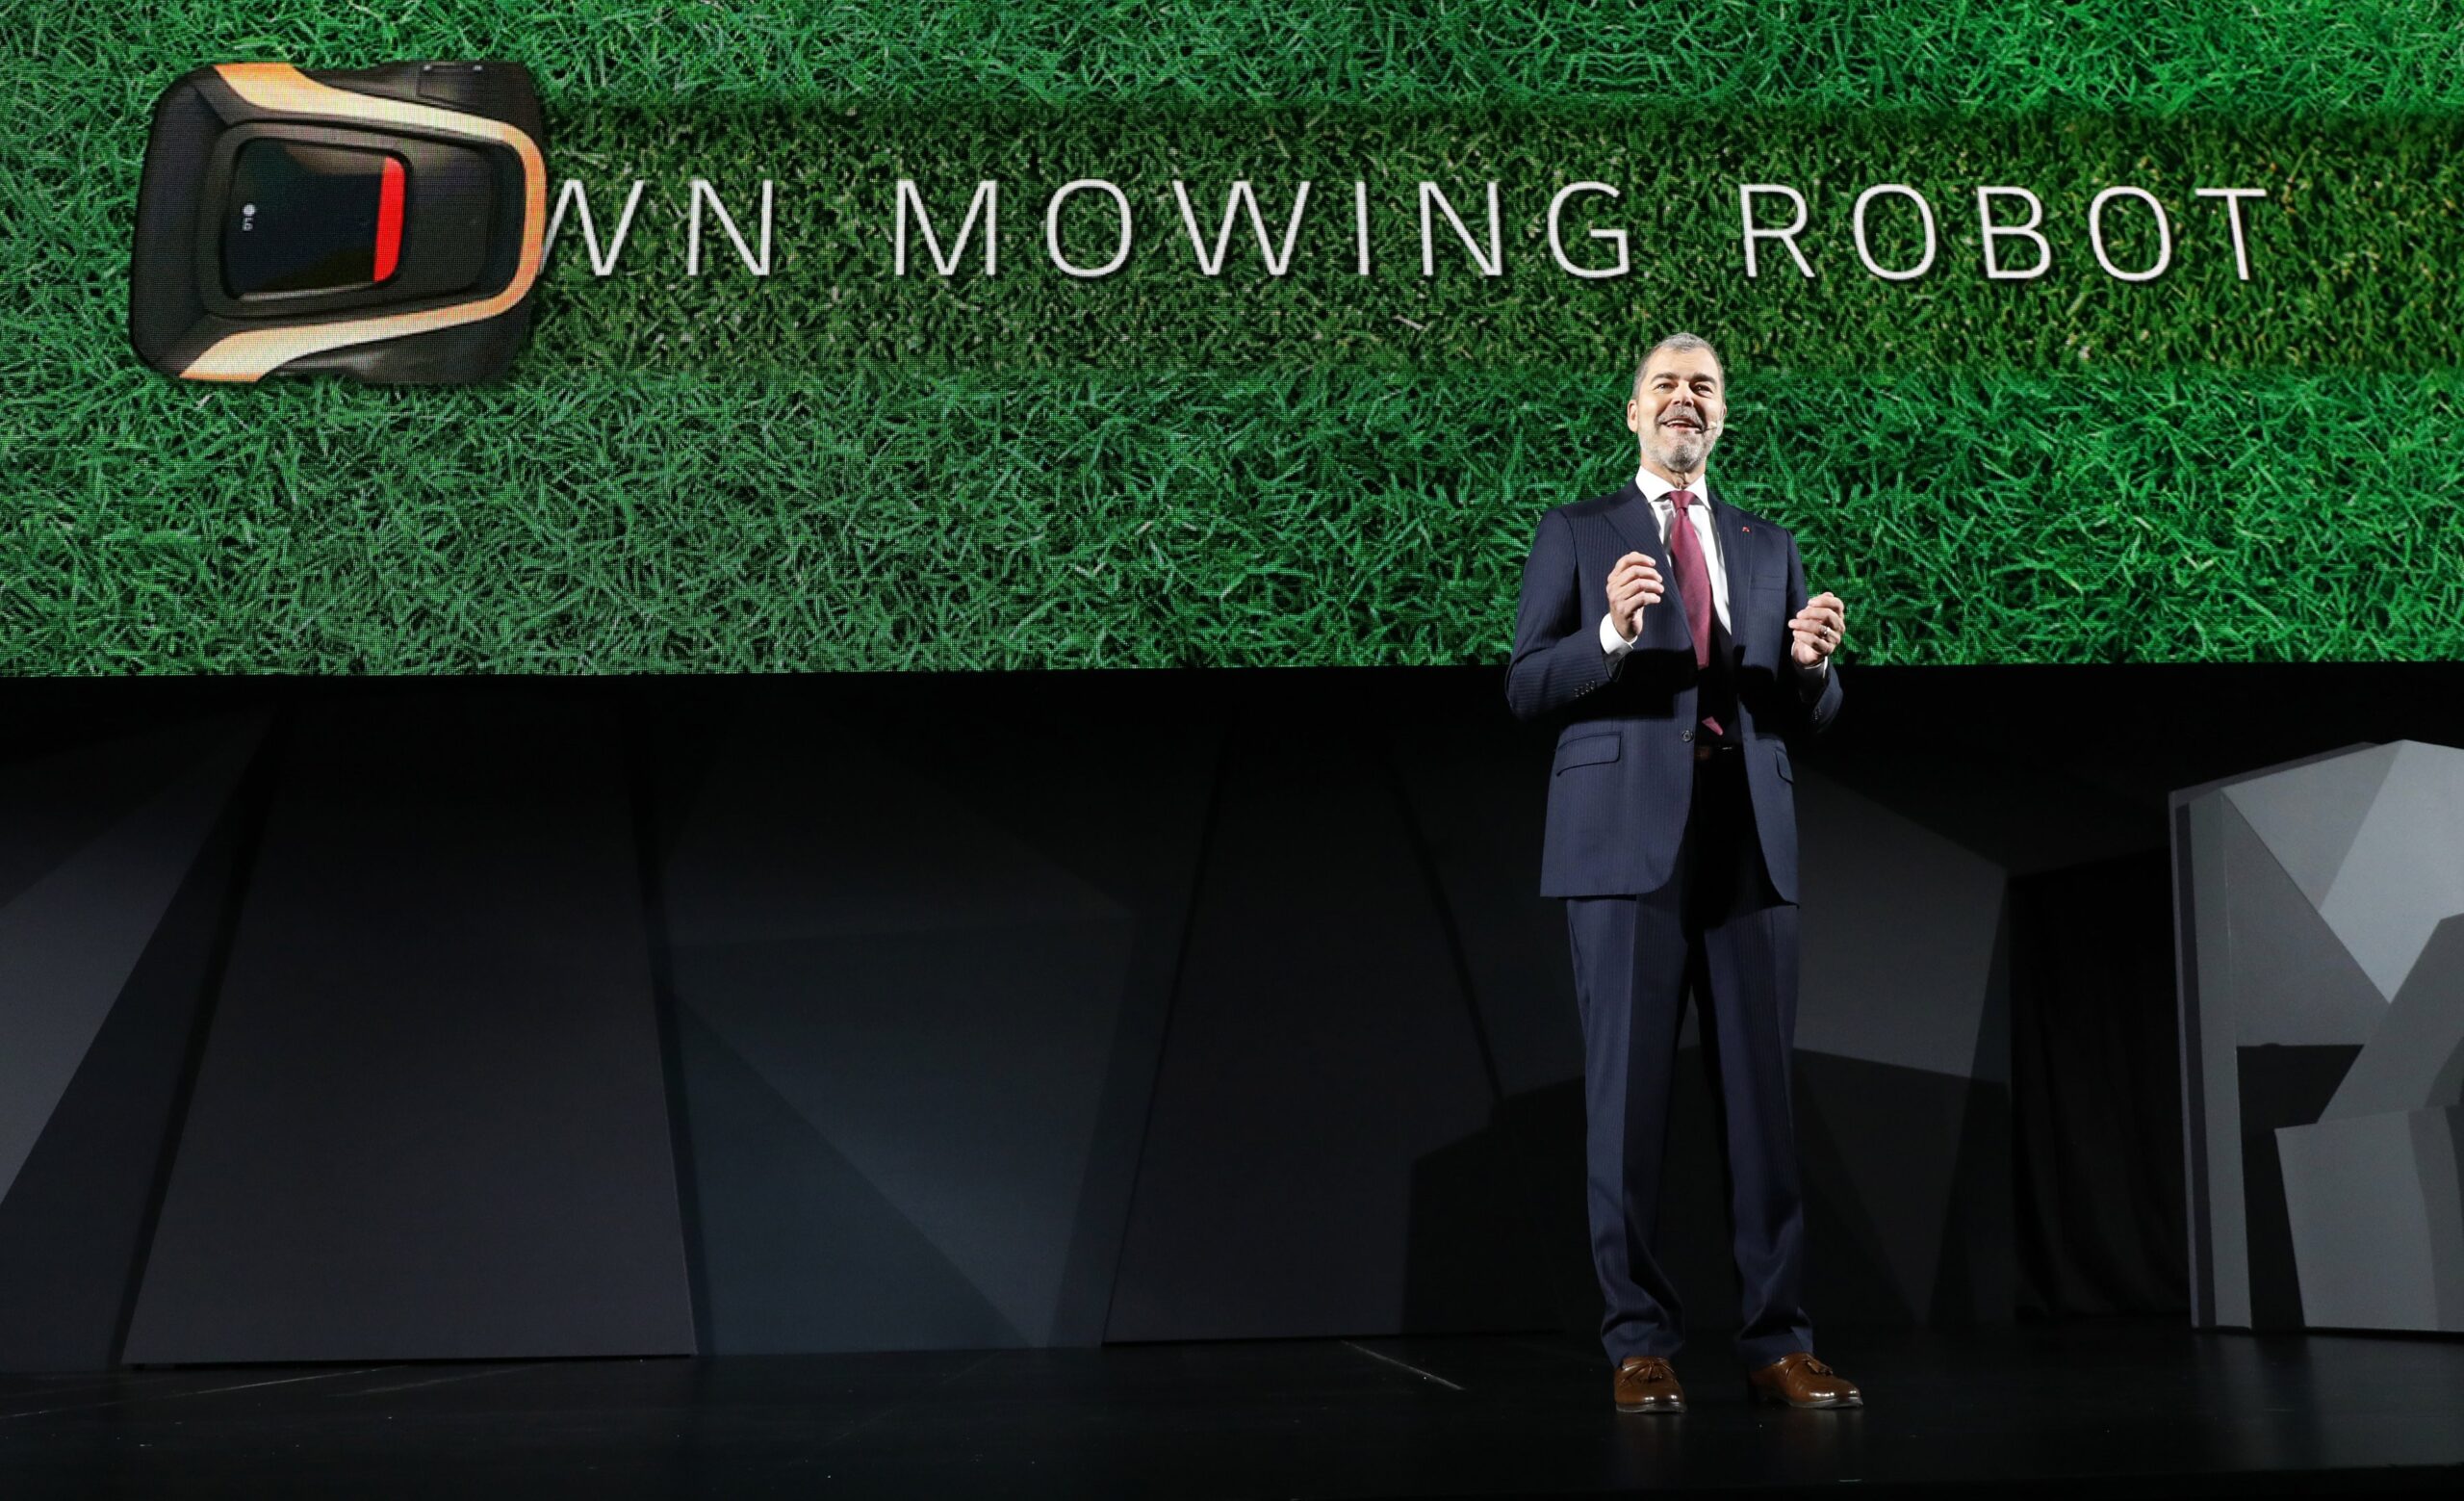 David VanderWaal, Senior Vice President, Marketing, LG Electronics introduces the LG Lawn Mowing Robot during the LG Press Conference at CES 2017.